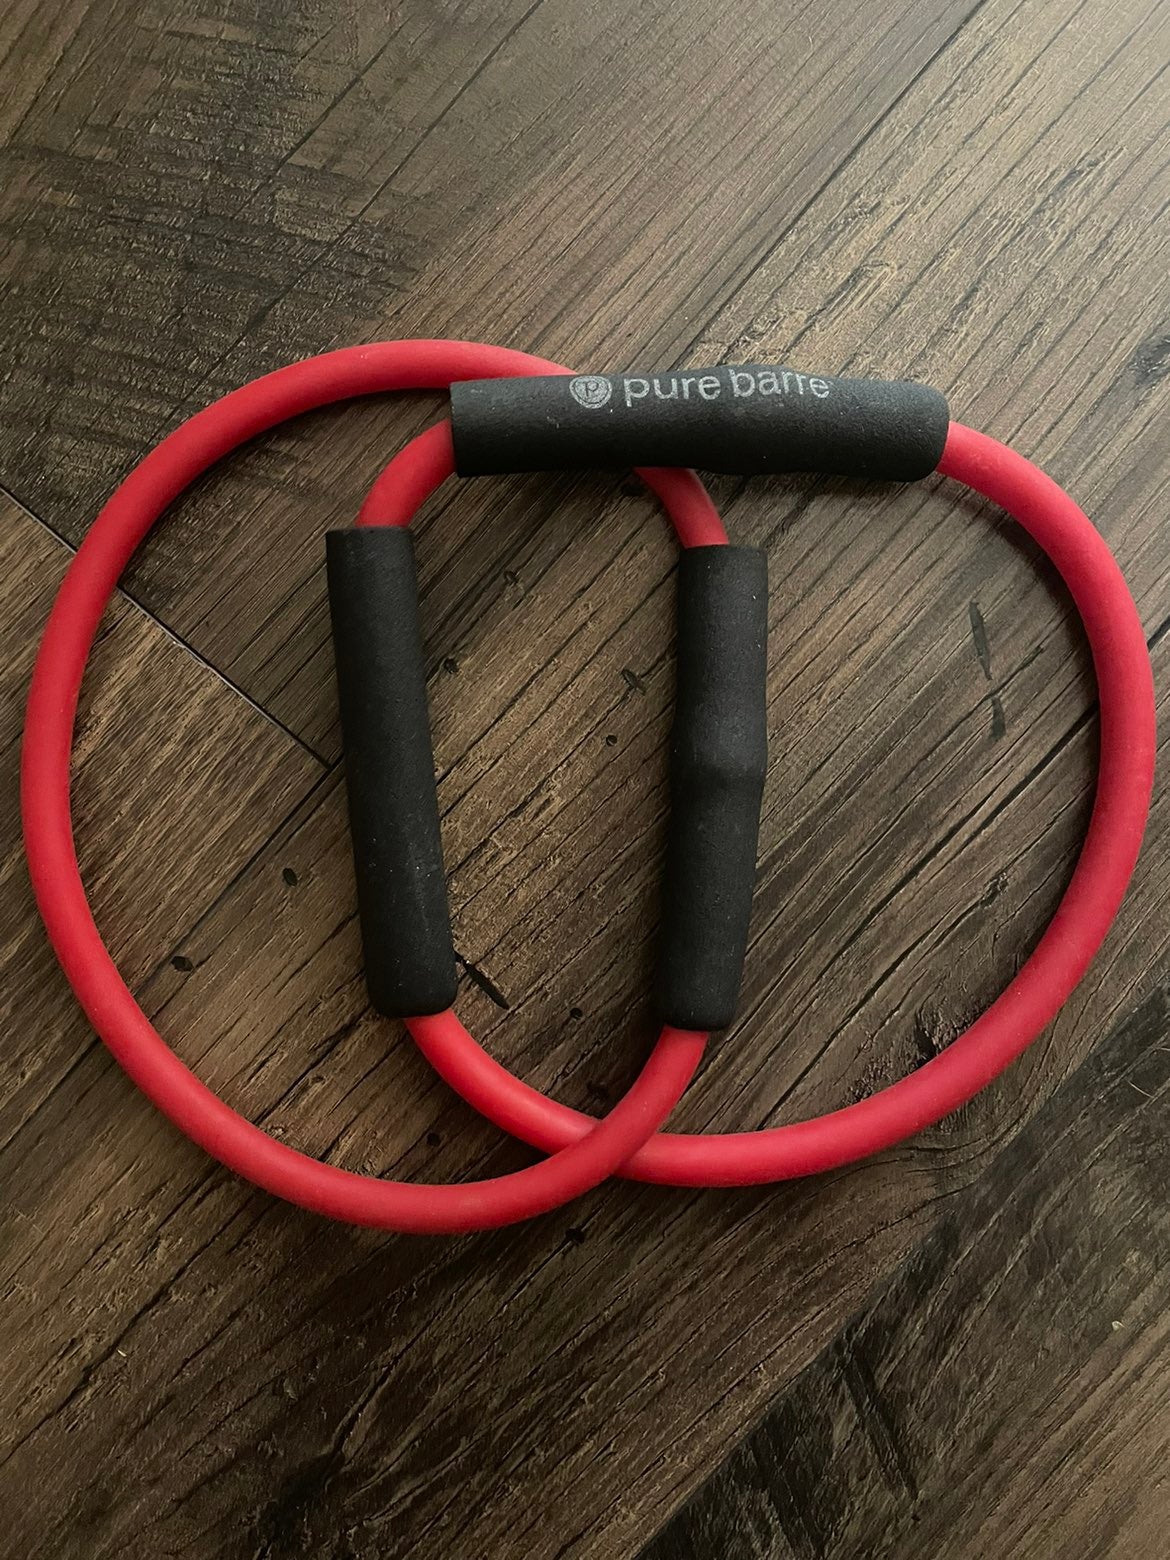  Life By Lexie Barre Red Double Tube Exercise Tubing